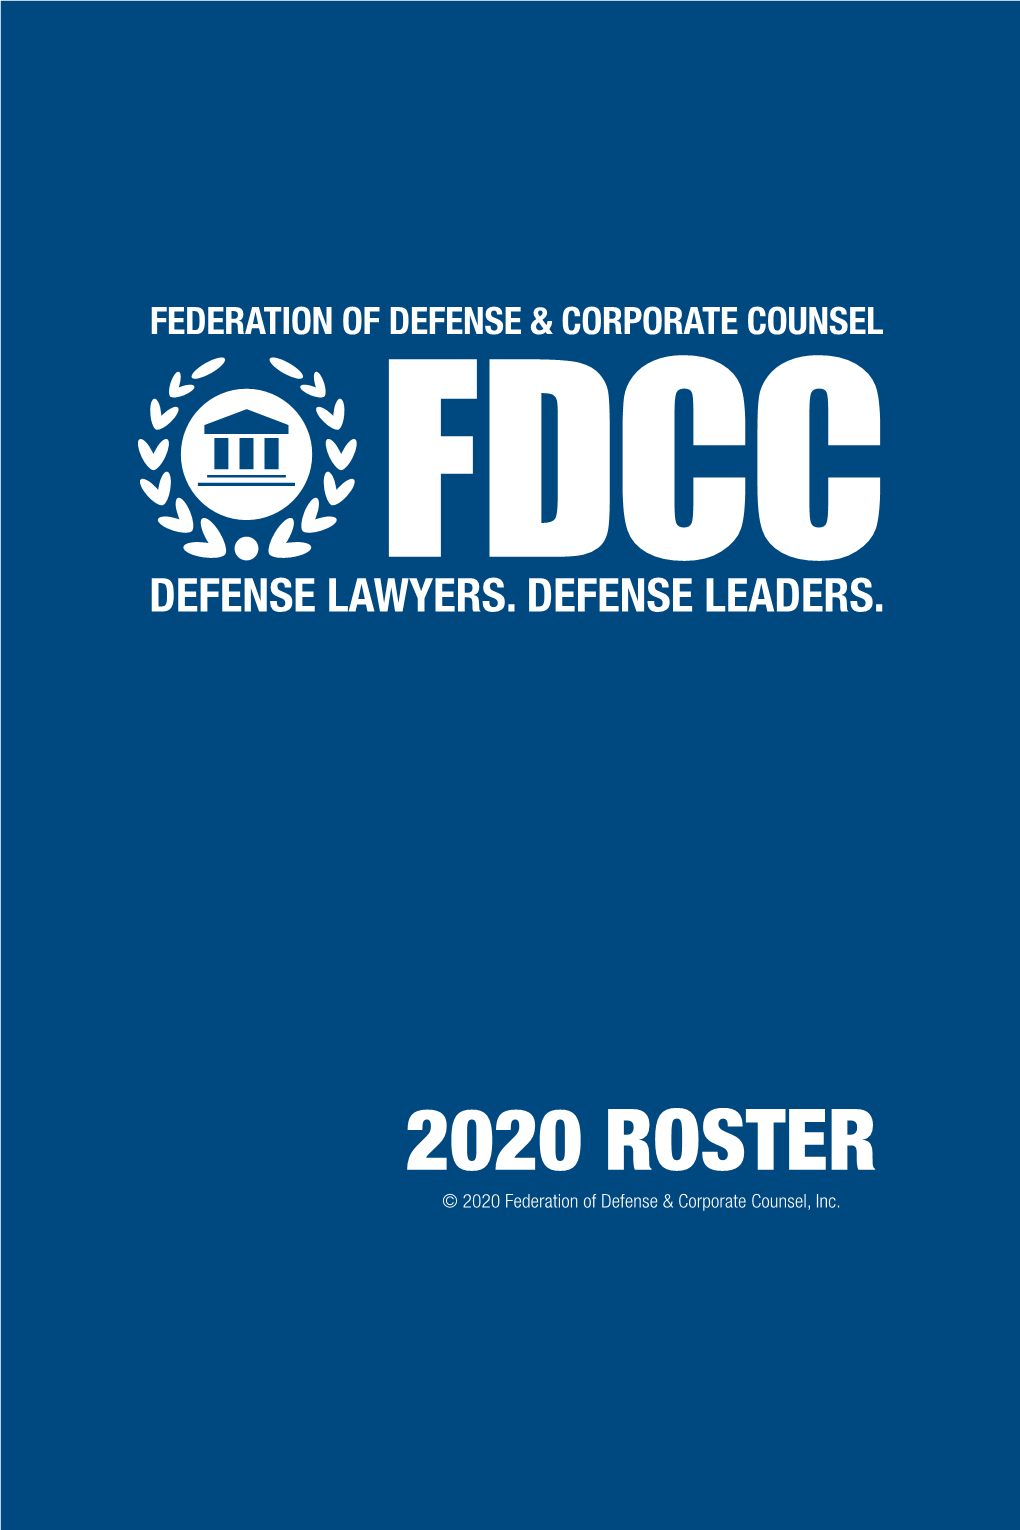 2020 ROSTER © 2020 Federation of Defense & Corporate Counsel, Inc